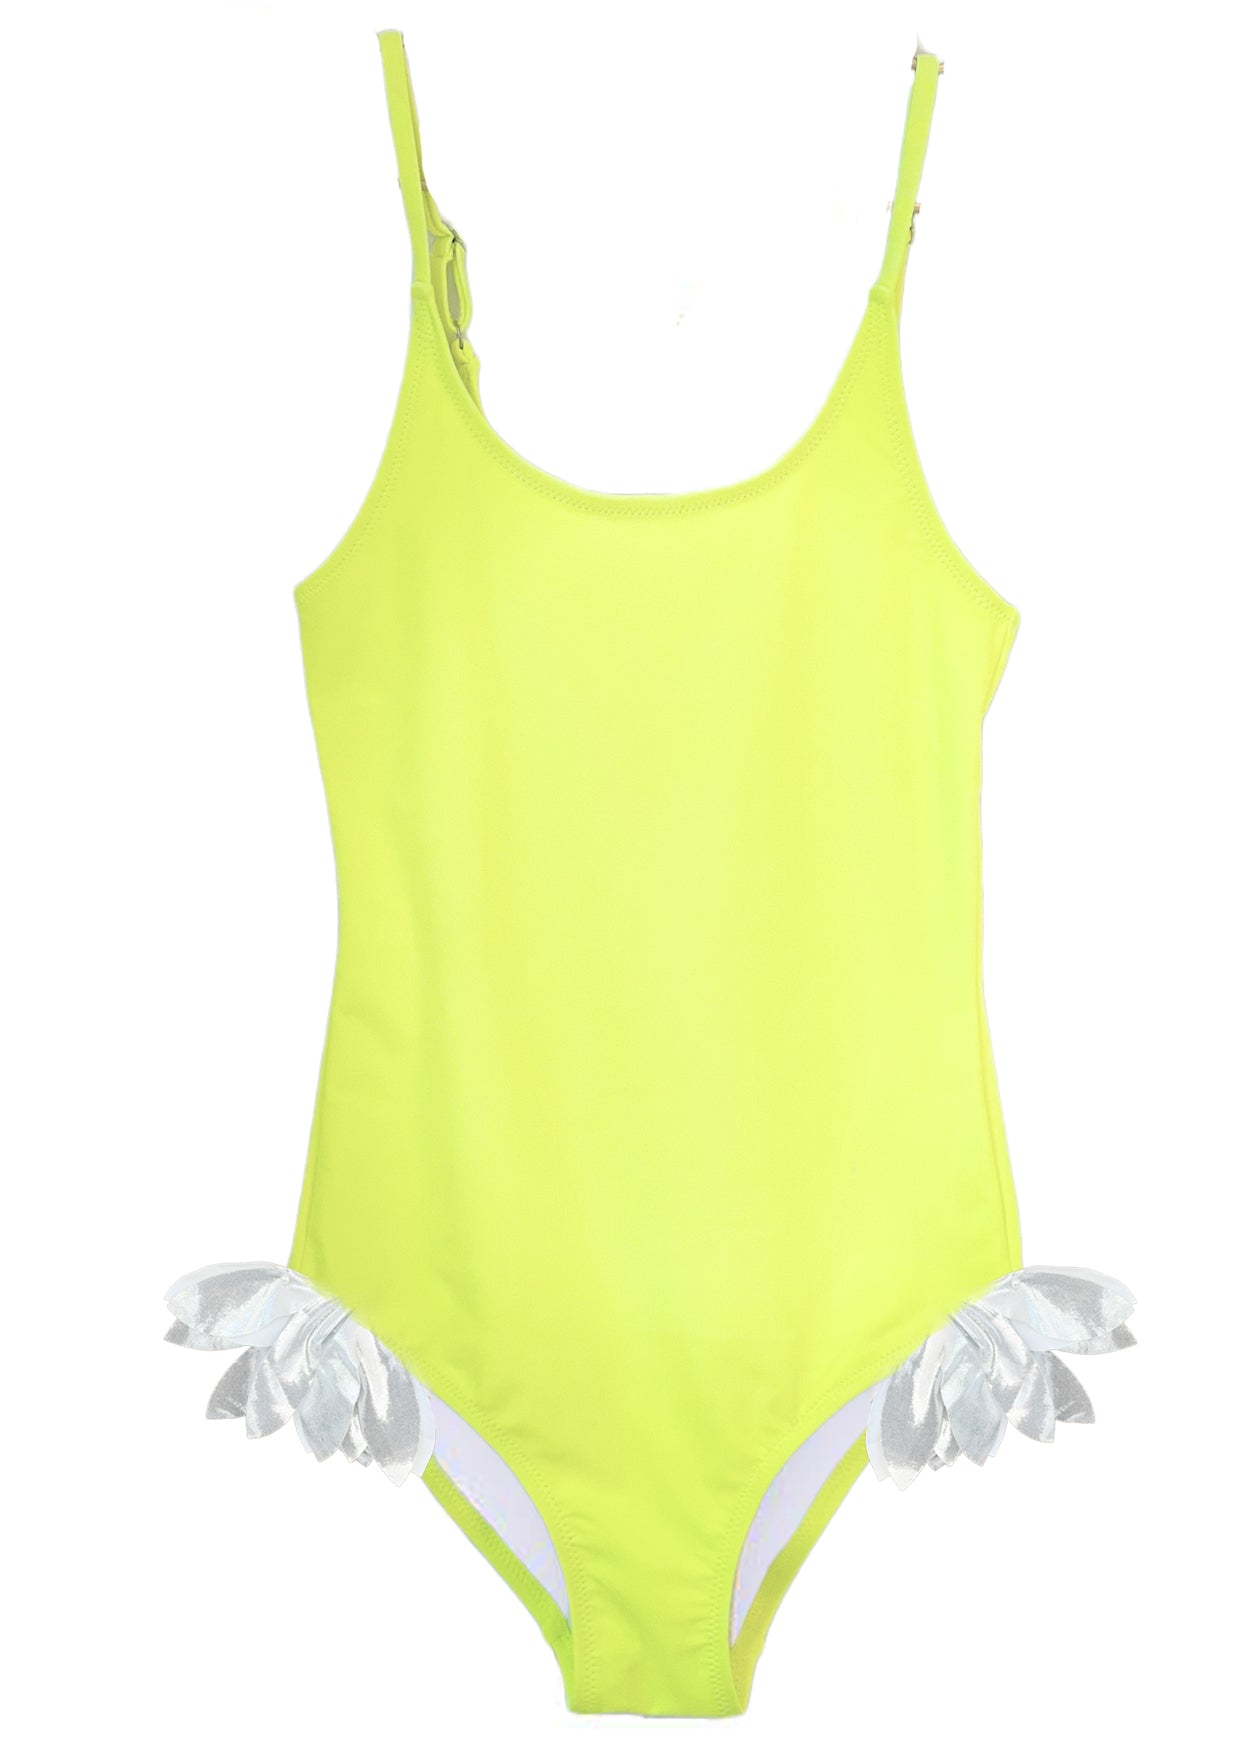 Neon Yellow Swimsuit with Silver Petals